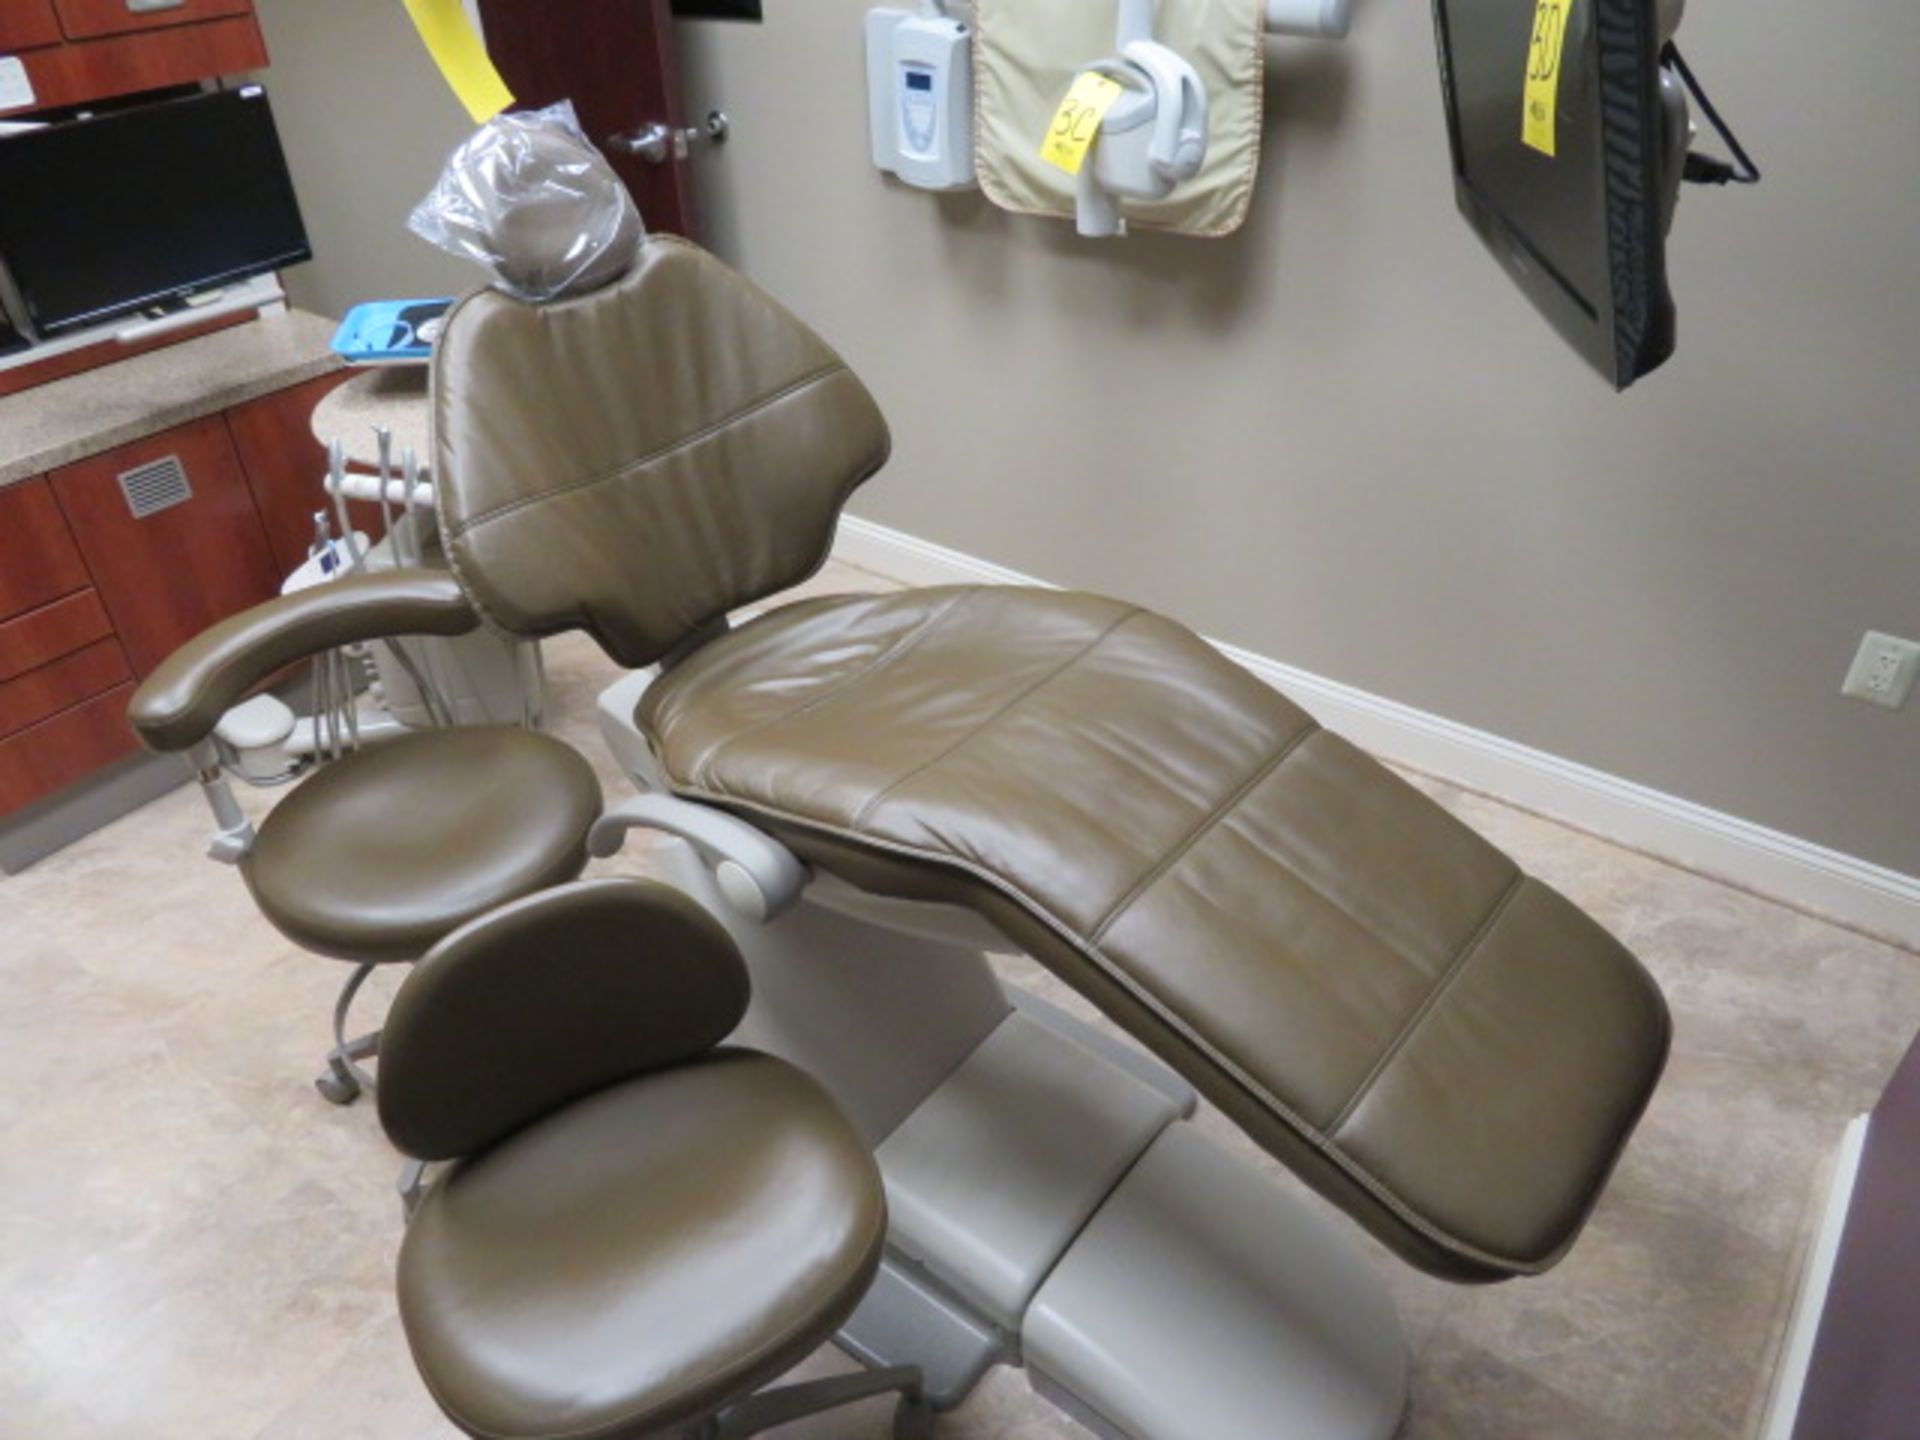 ADEC 511 SERIES DENTAL CHAIR, 541 DUO REAR-DELIVERY UNIT, 5580 CABINET, 5531/5730 SINK W/ CABINET - Image 2 of 3